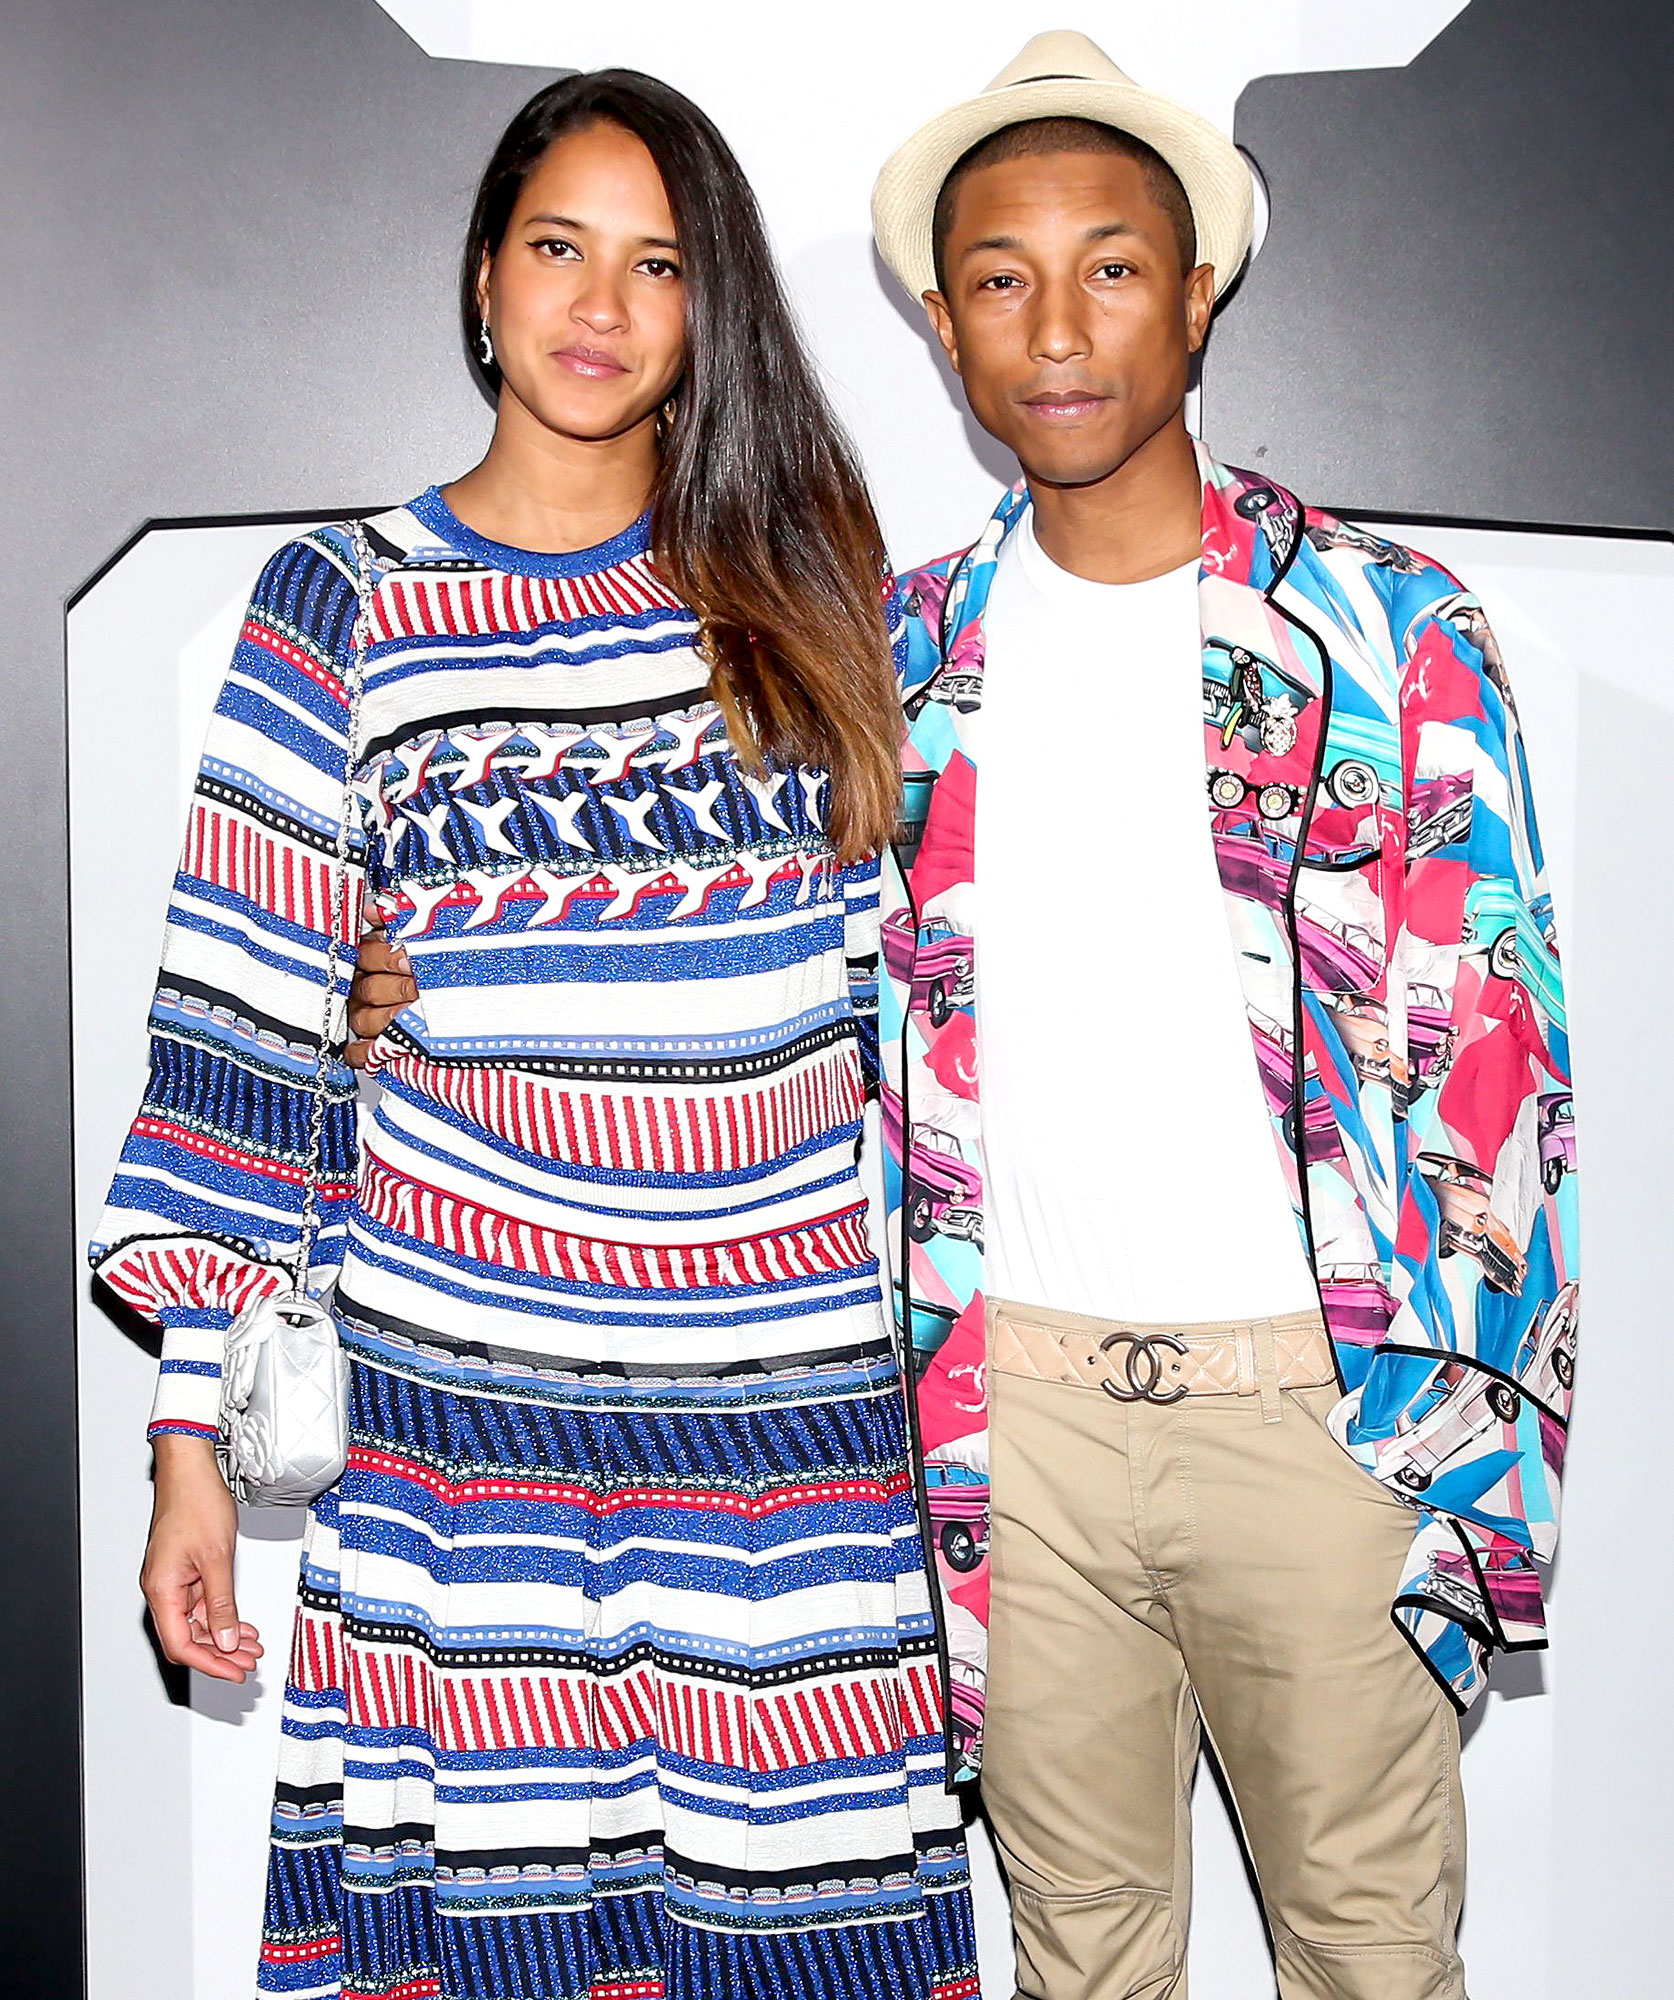 Pharrell Williams And Wife Helen Lasichanh Welcome Triplets